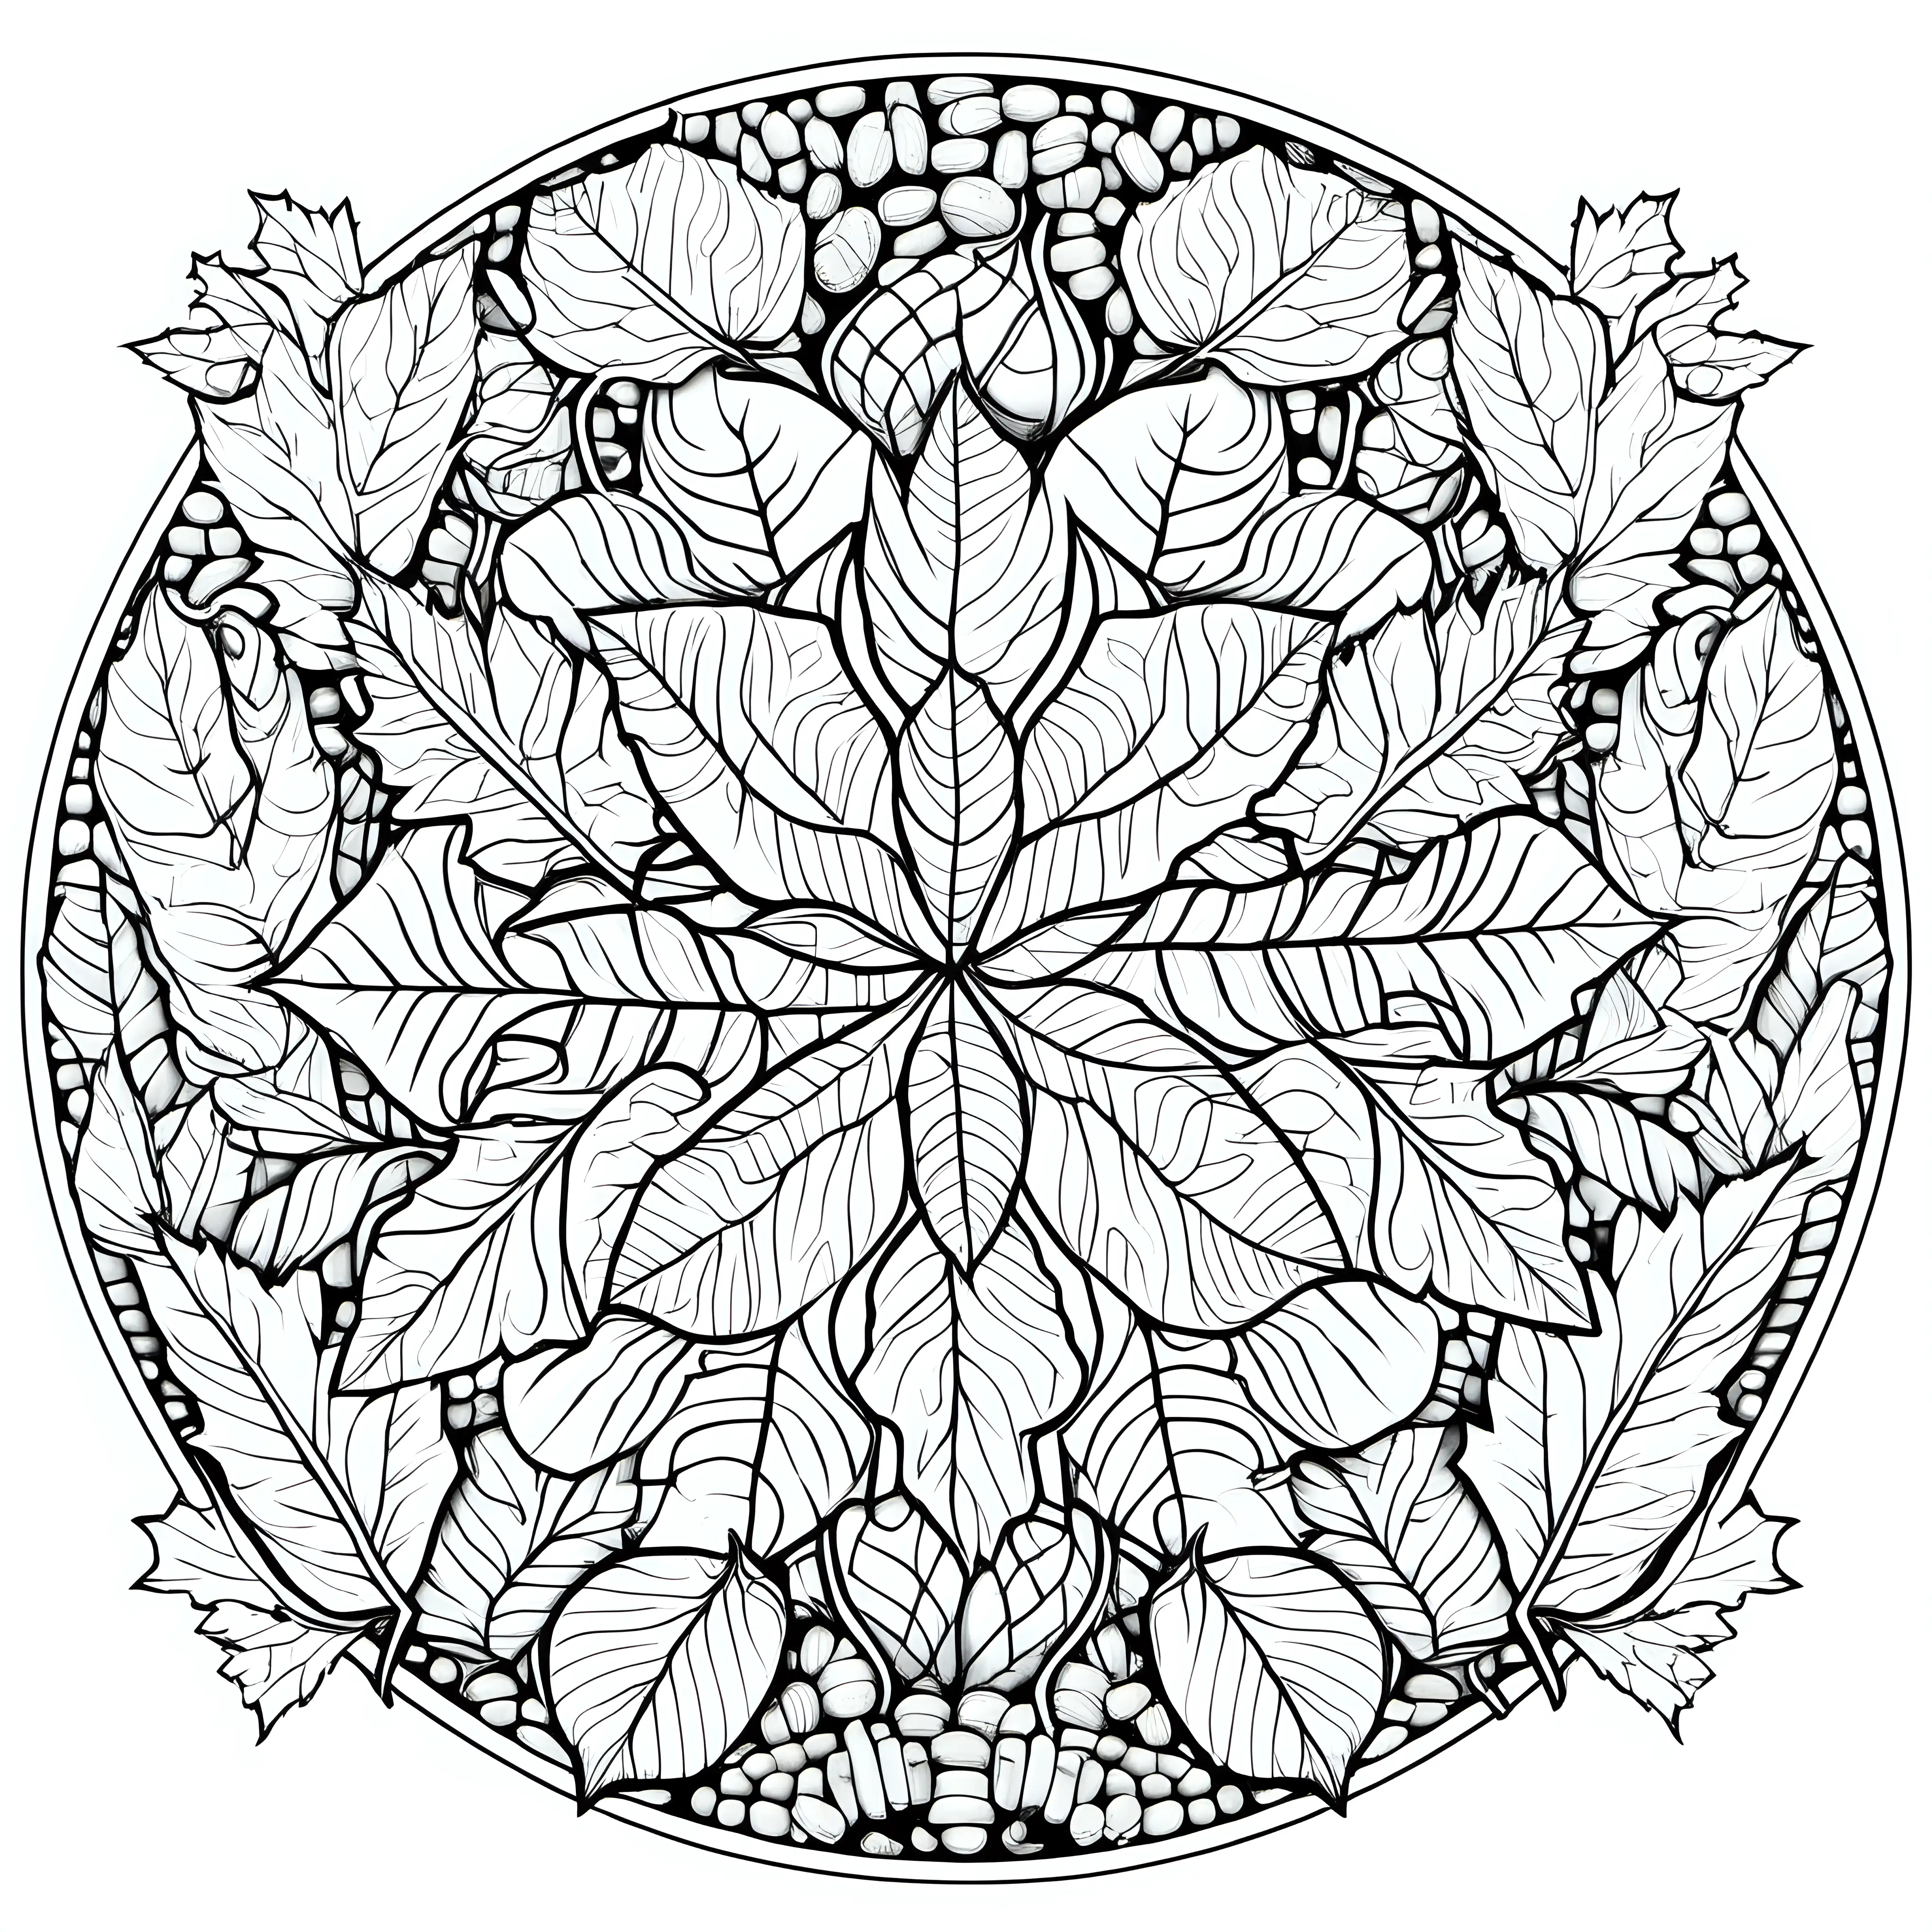 Autumn Leaves Mandala: A mandala featuring various autumn leaves, acorns, and fall colors for coloring book with crisp lines and white background